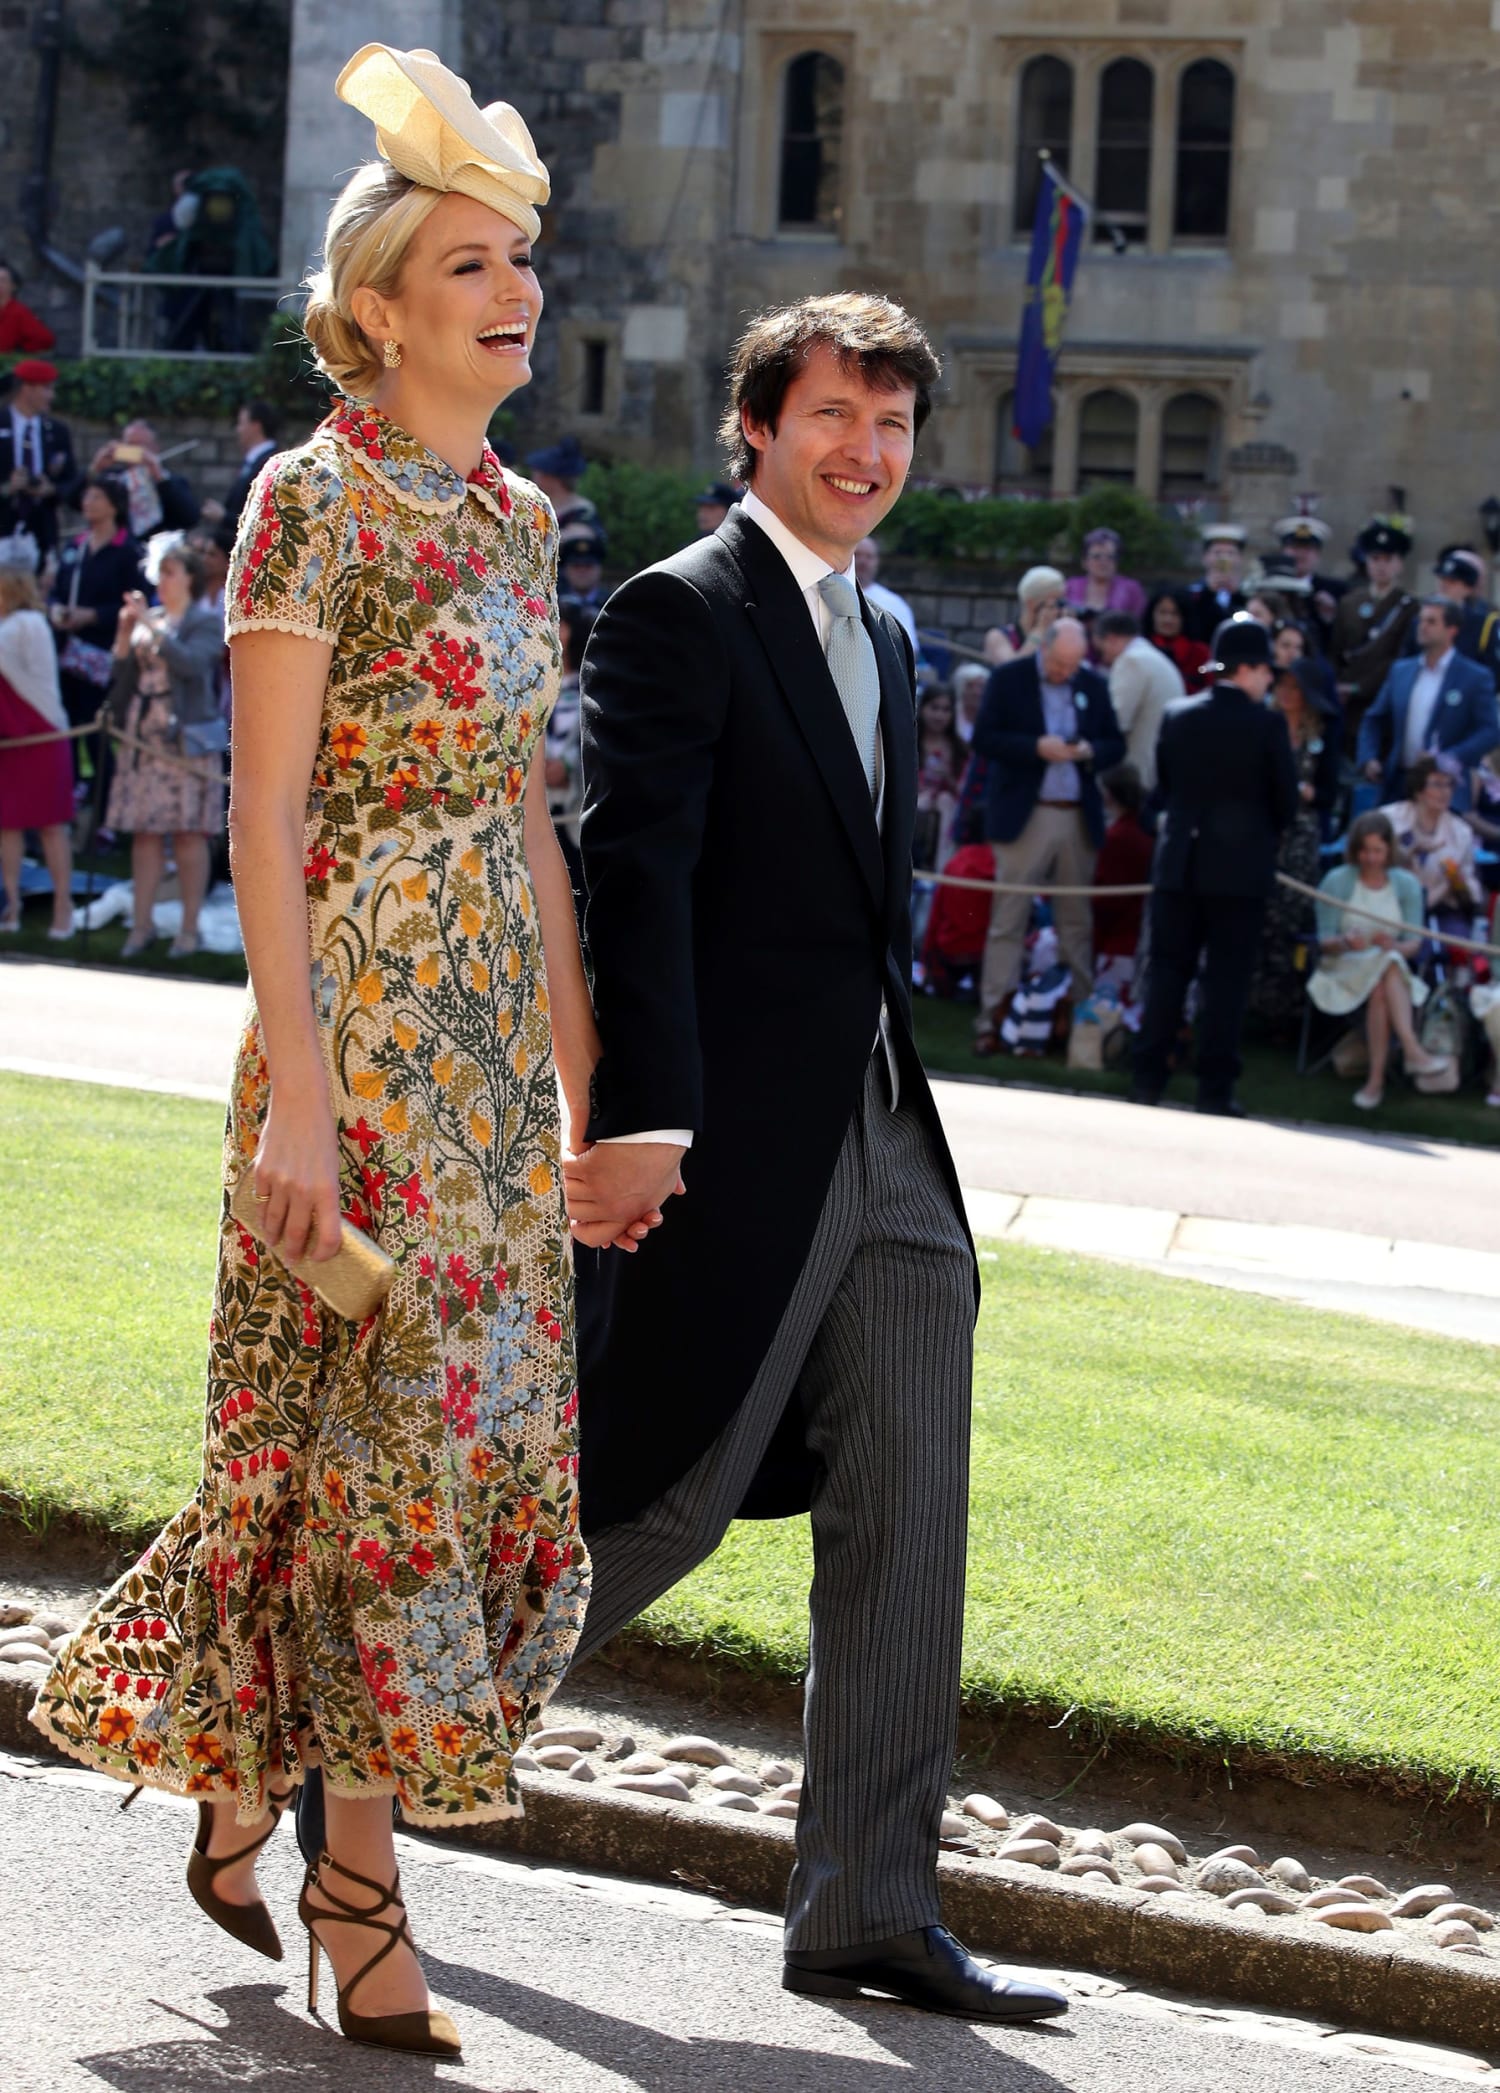 Celebs who attended royal wedding